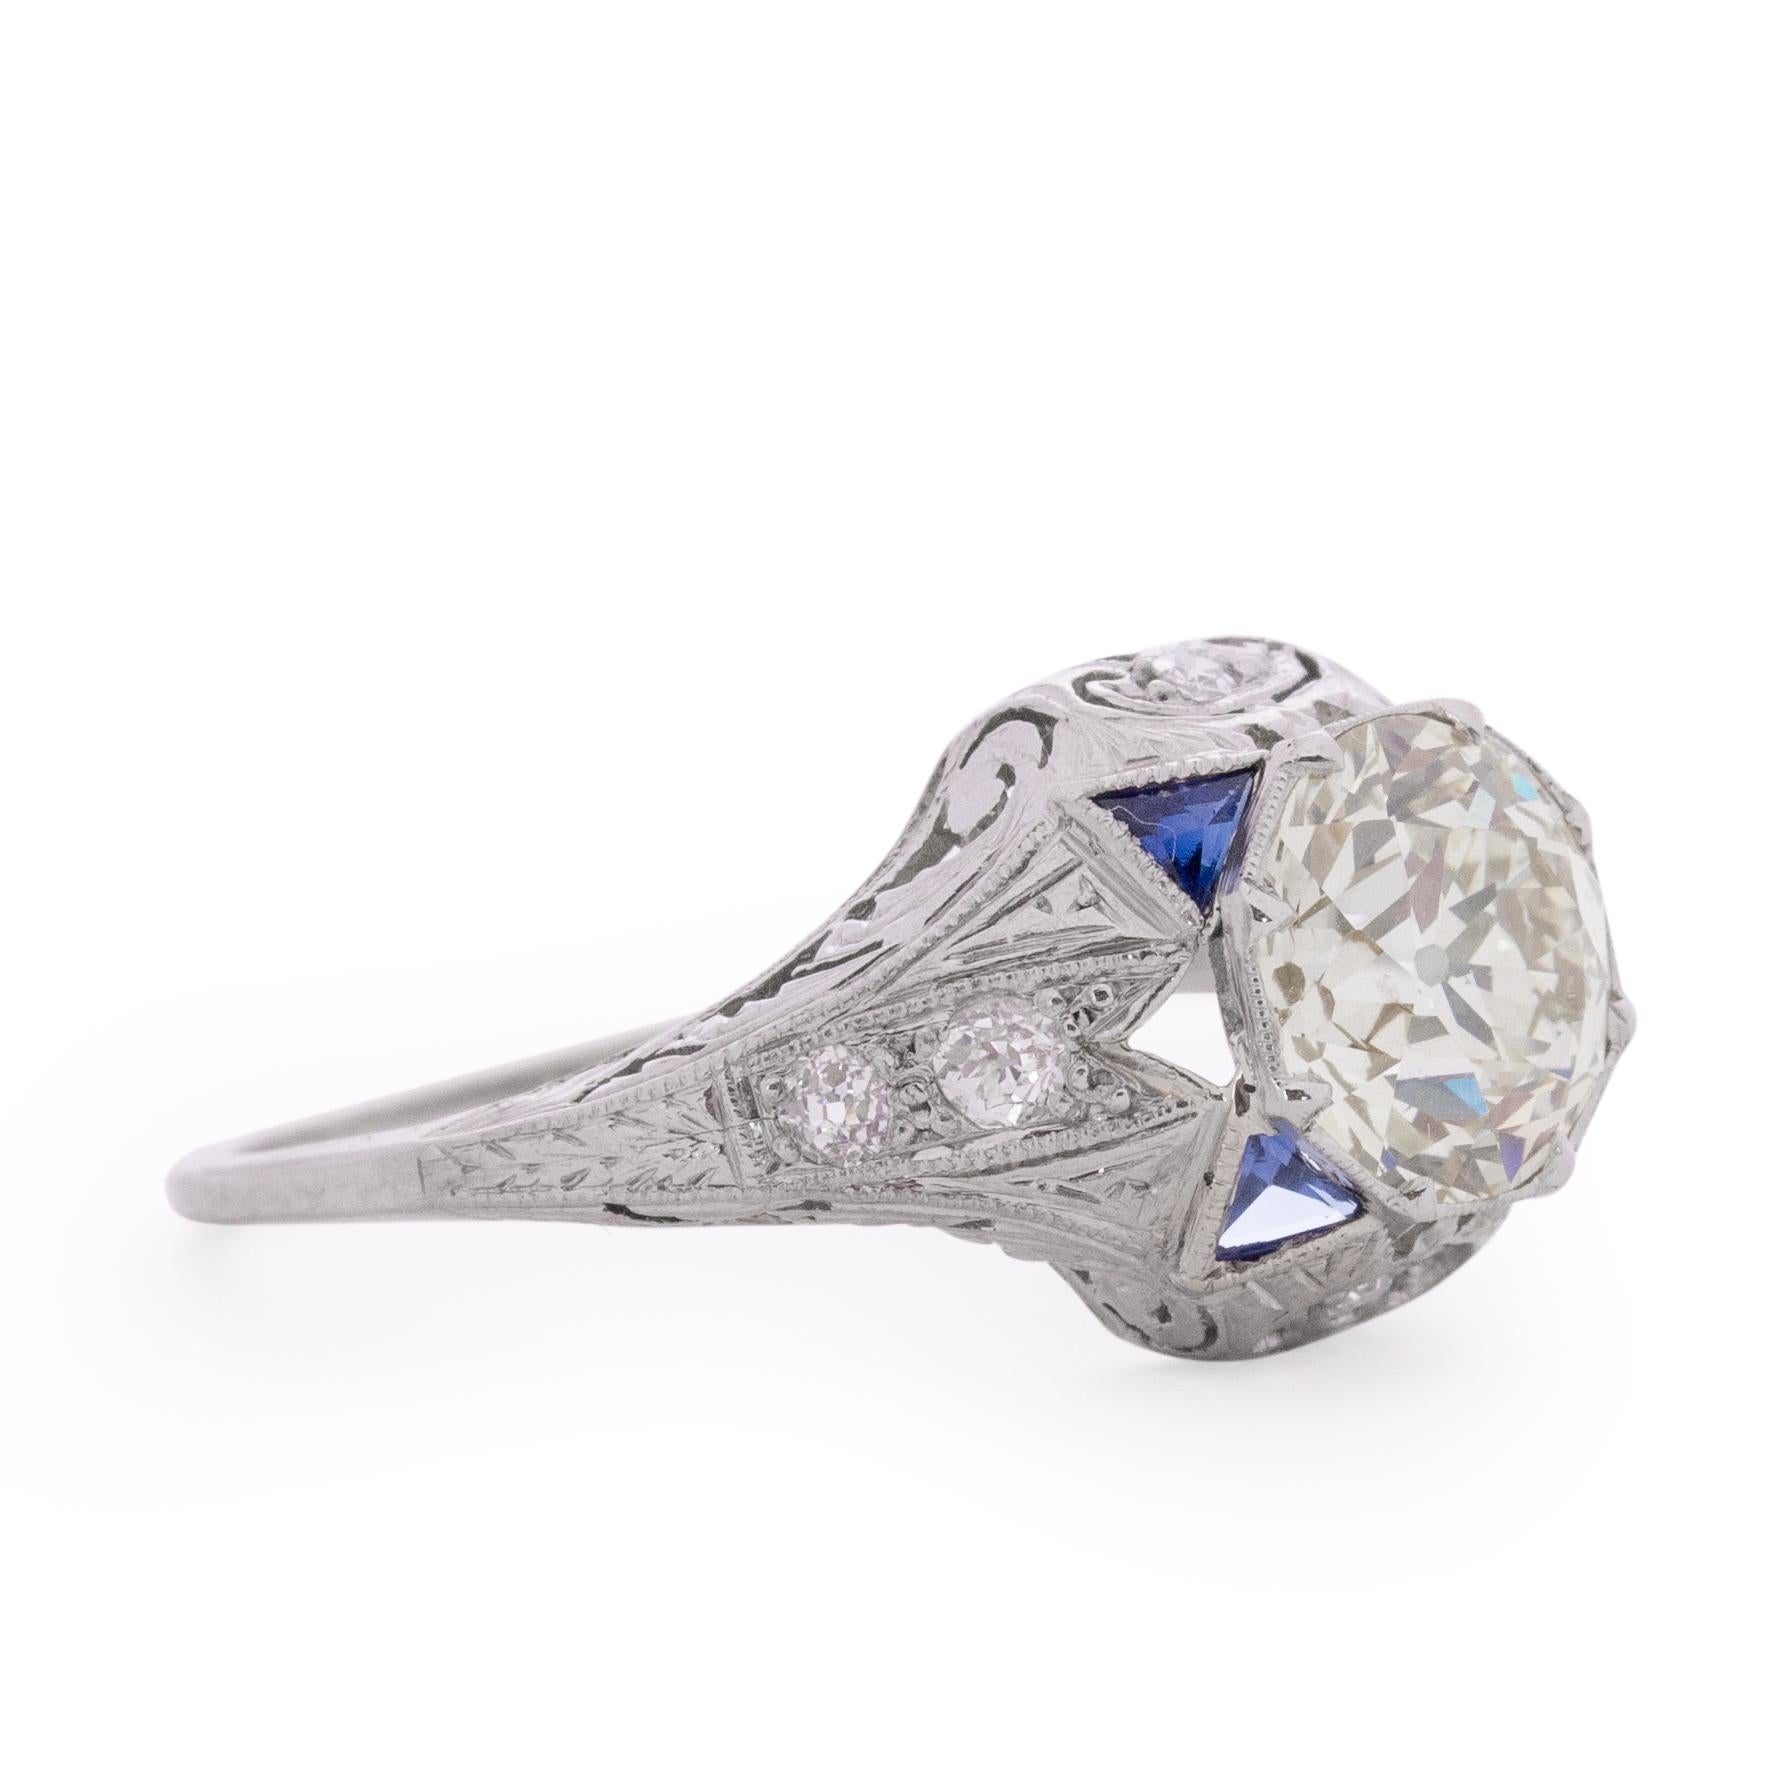 This Art Deco beauty is an excellent example of the era. There is a pierced open back pattern throughout the ring to allow light and brilliance to be at a maximum for each stone. The center diamond is 2.08 carat and SI1 clarity. The sapphire accents